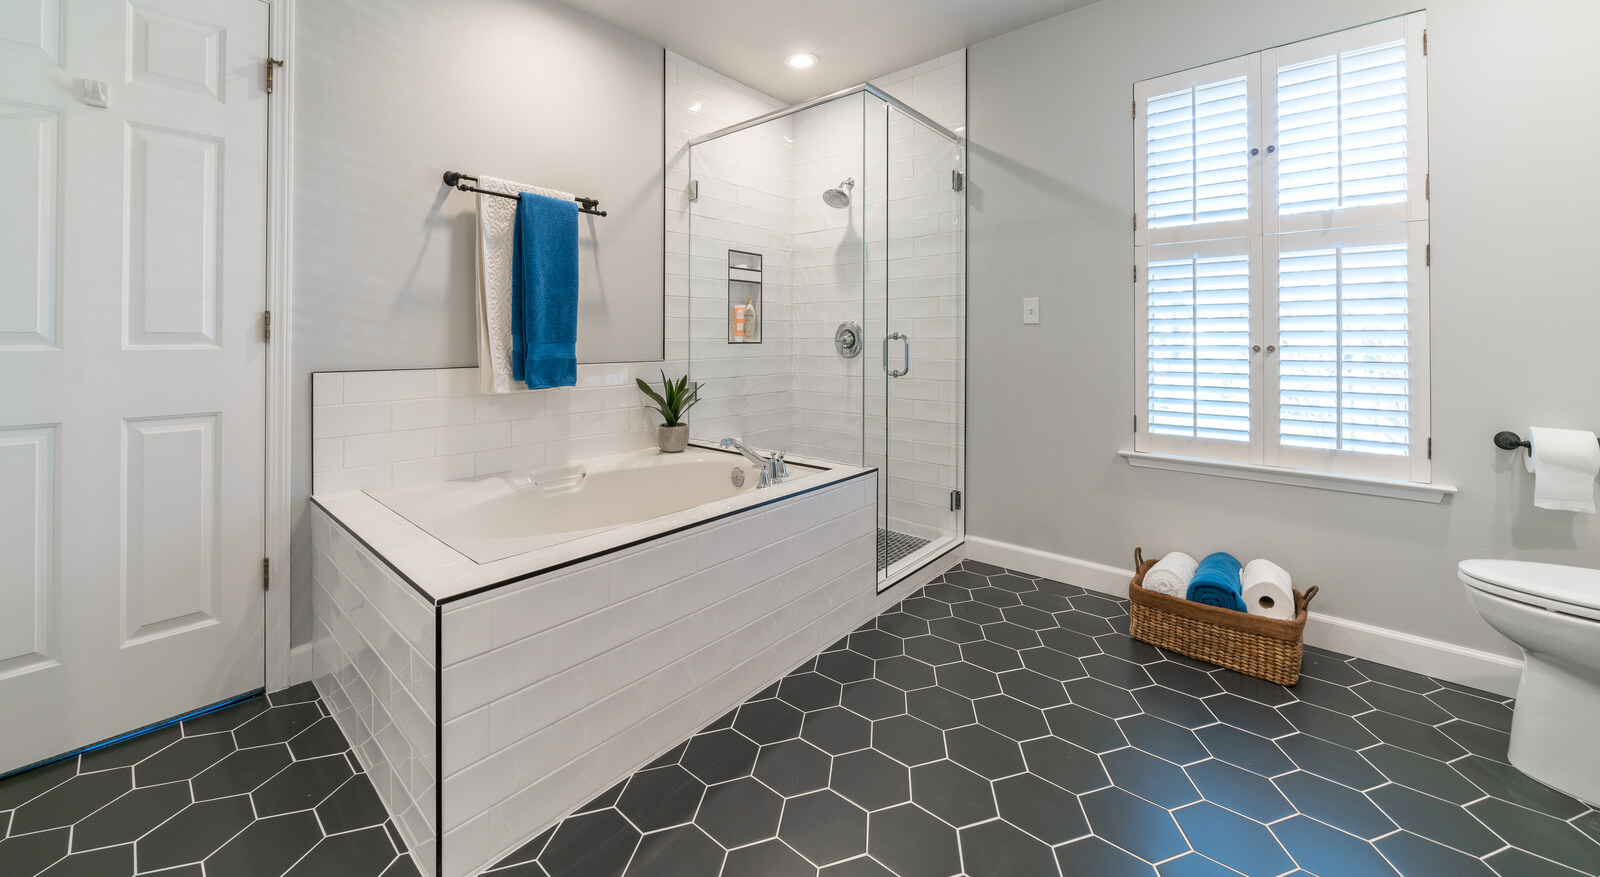 hexogonal tile floor in bathroom remodel in fresno with standing shower and spa bath tub (1)